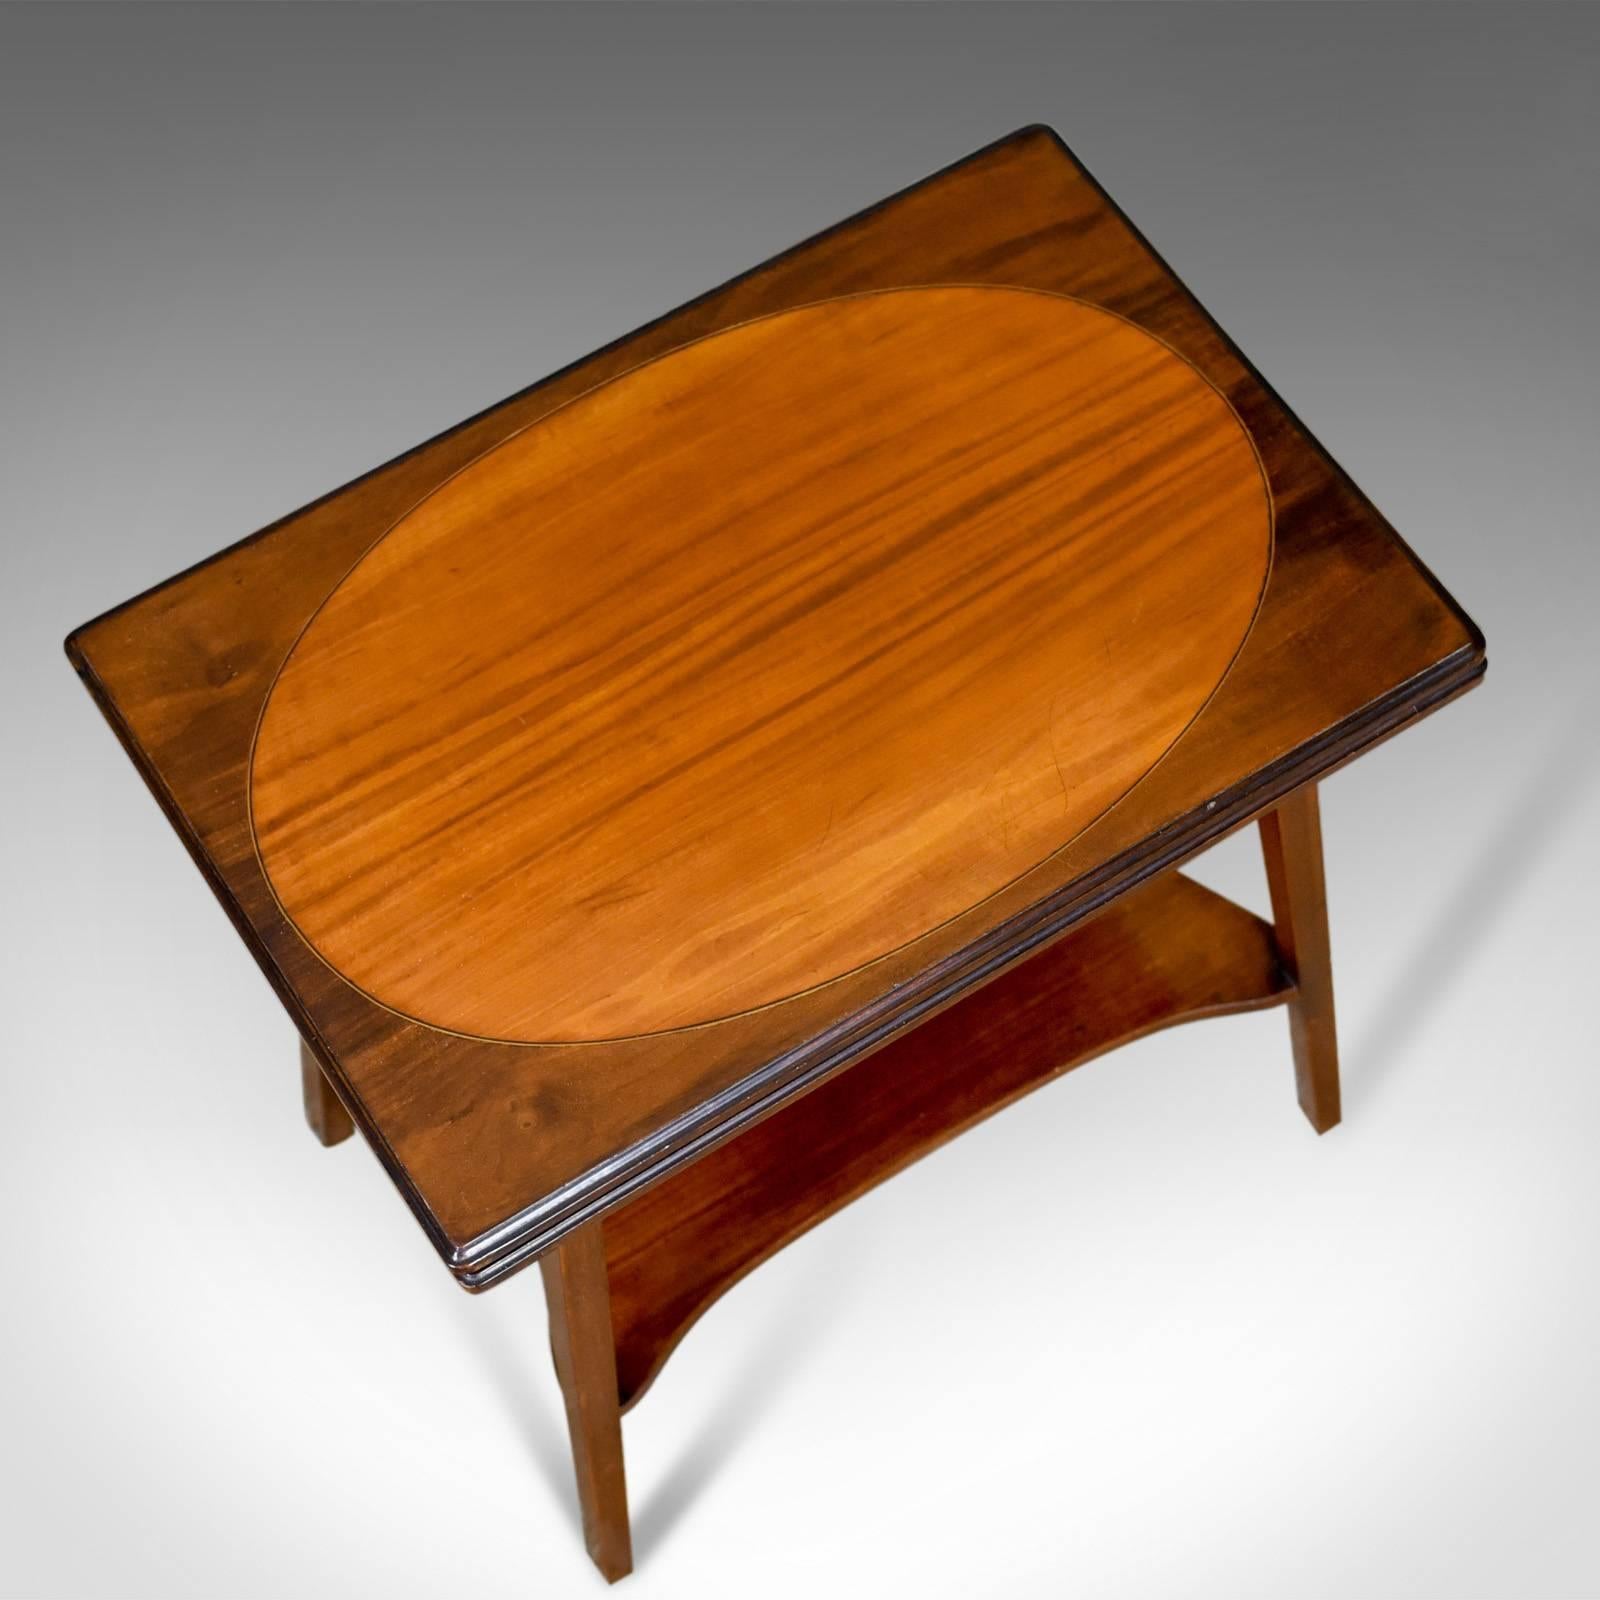 19th Century Antique Games Table, English, Fold-Over, Side, Mahogany, Satinwood, circa 1900